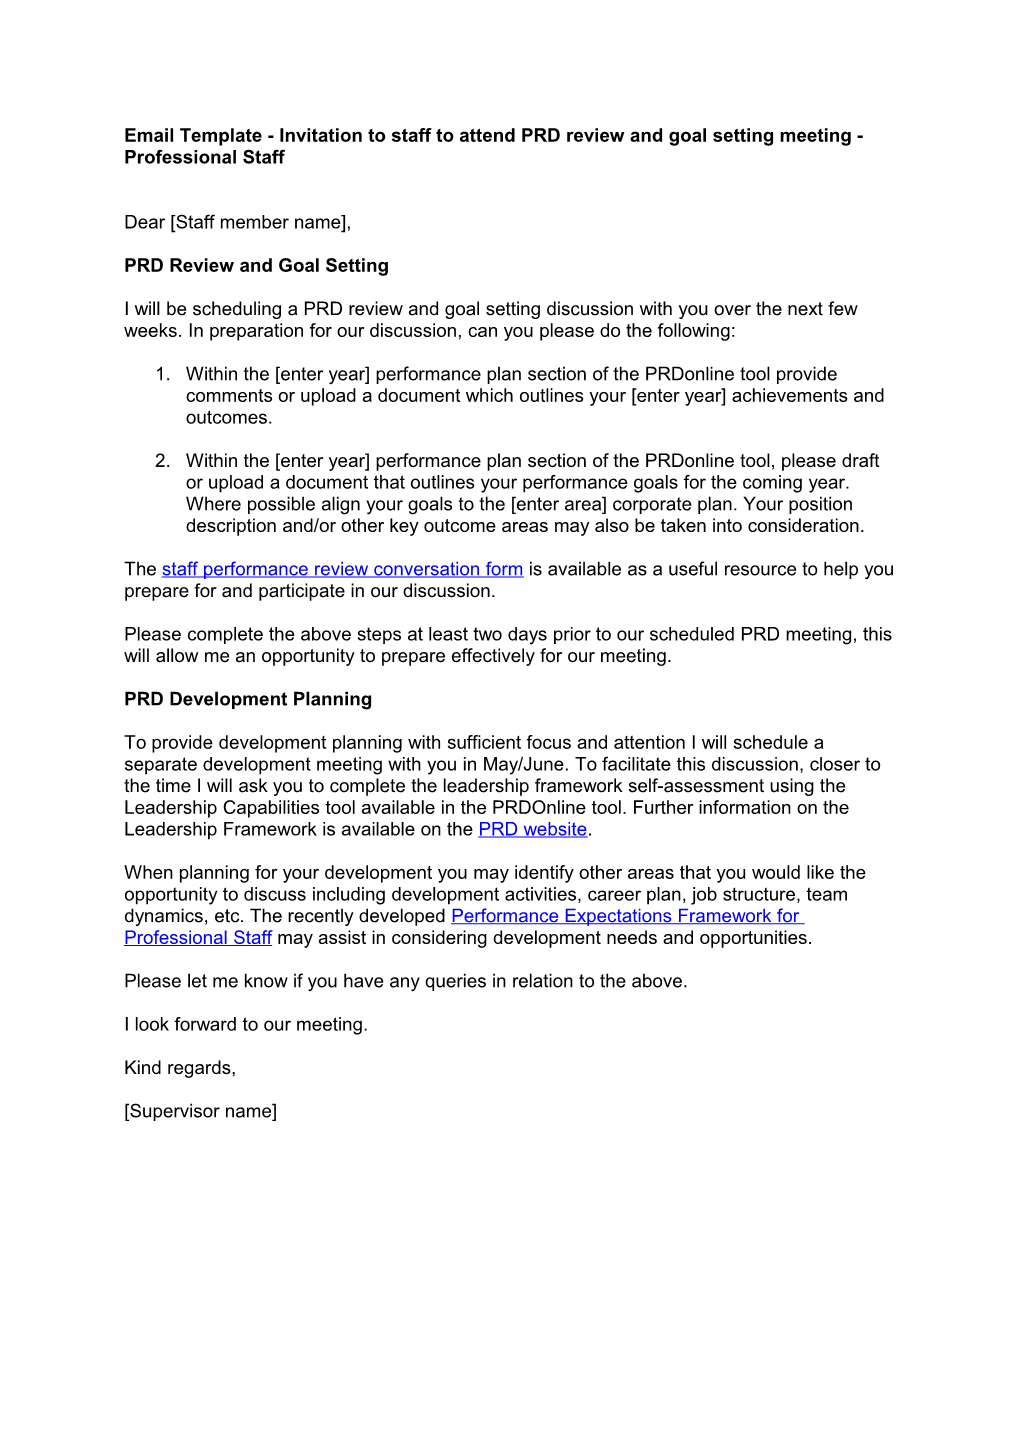 Email Template- Invitation to Staff to Attend PRD Review and Goal Setting Meeting